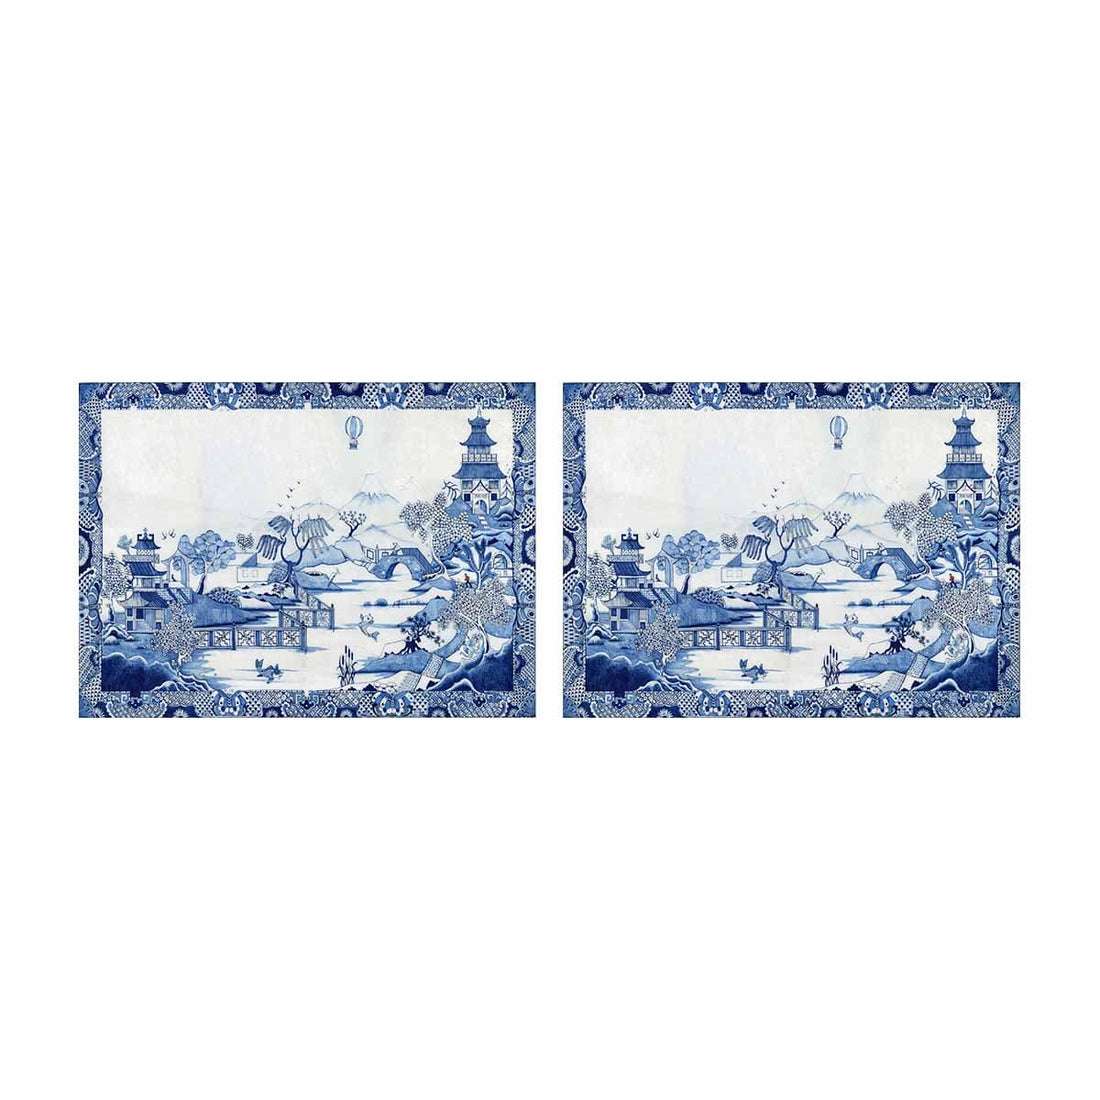 Kate McEnroe New York Chinoiserie Blue Willow Placemats-Set of 2 285373989037 One Size DG1511788DXH2461D